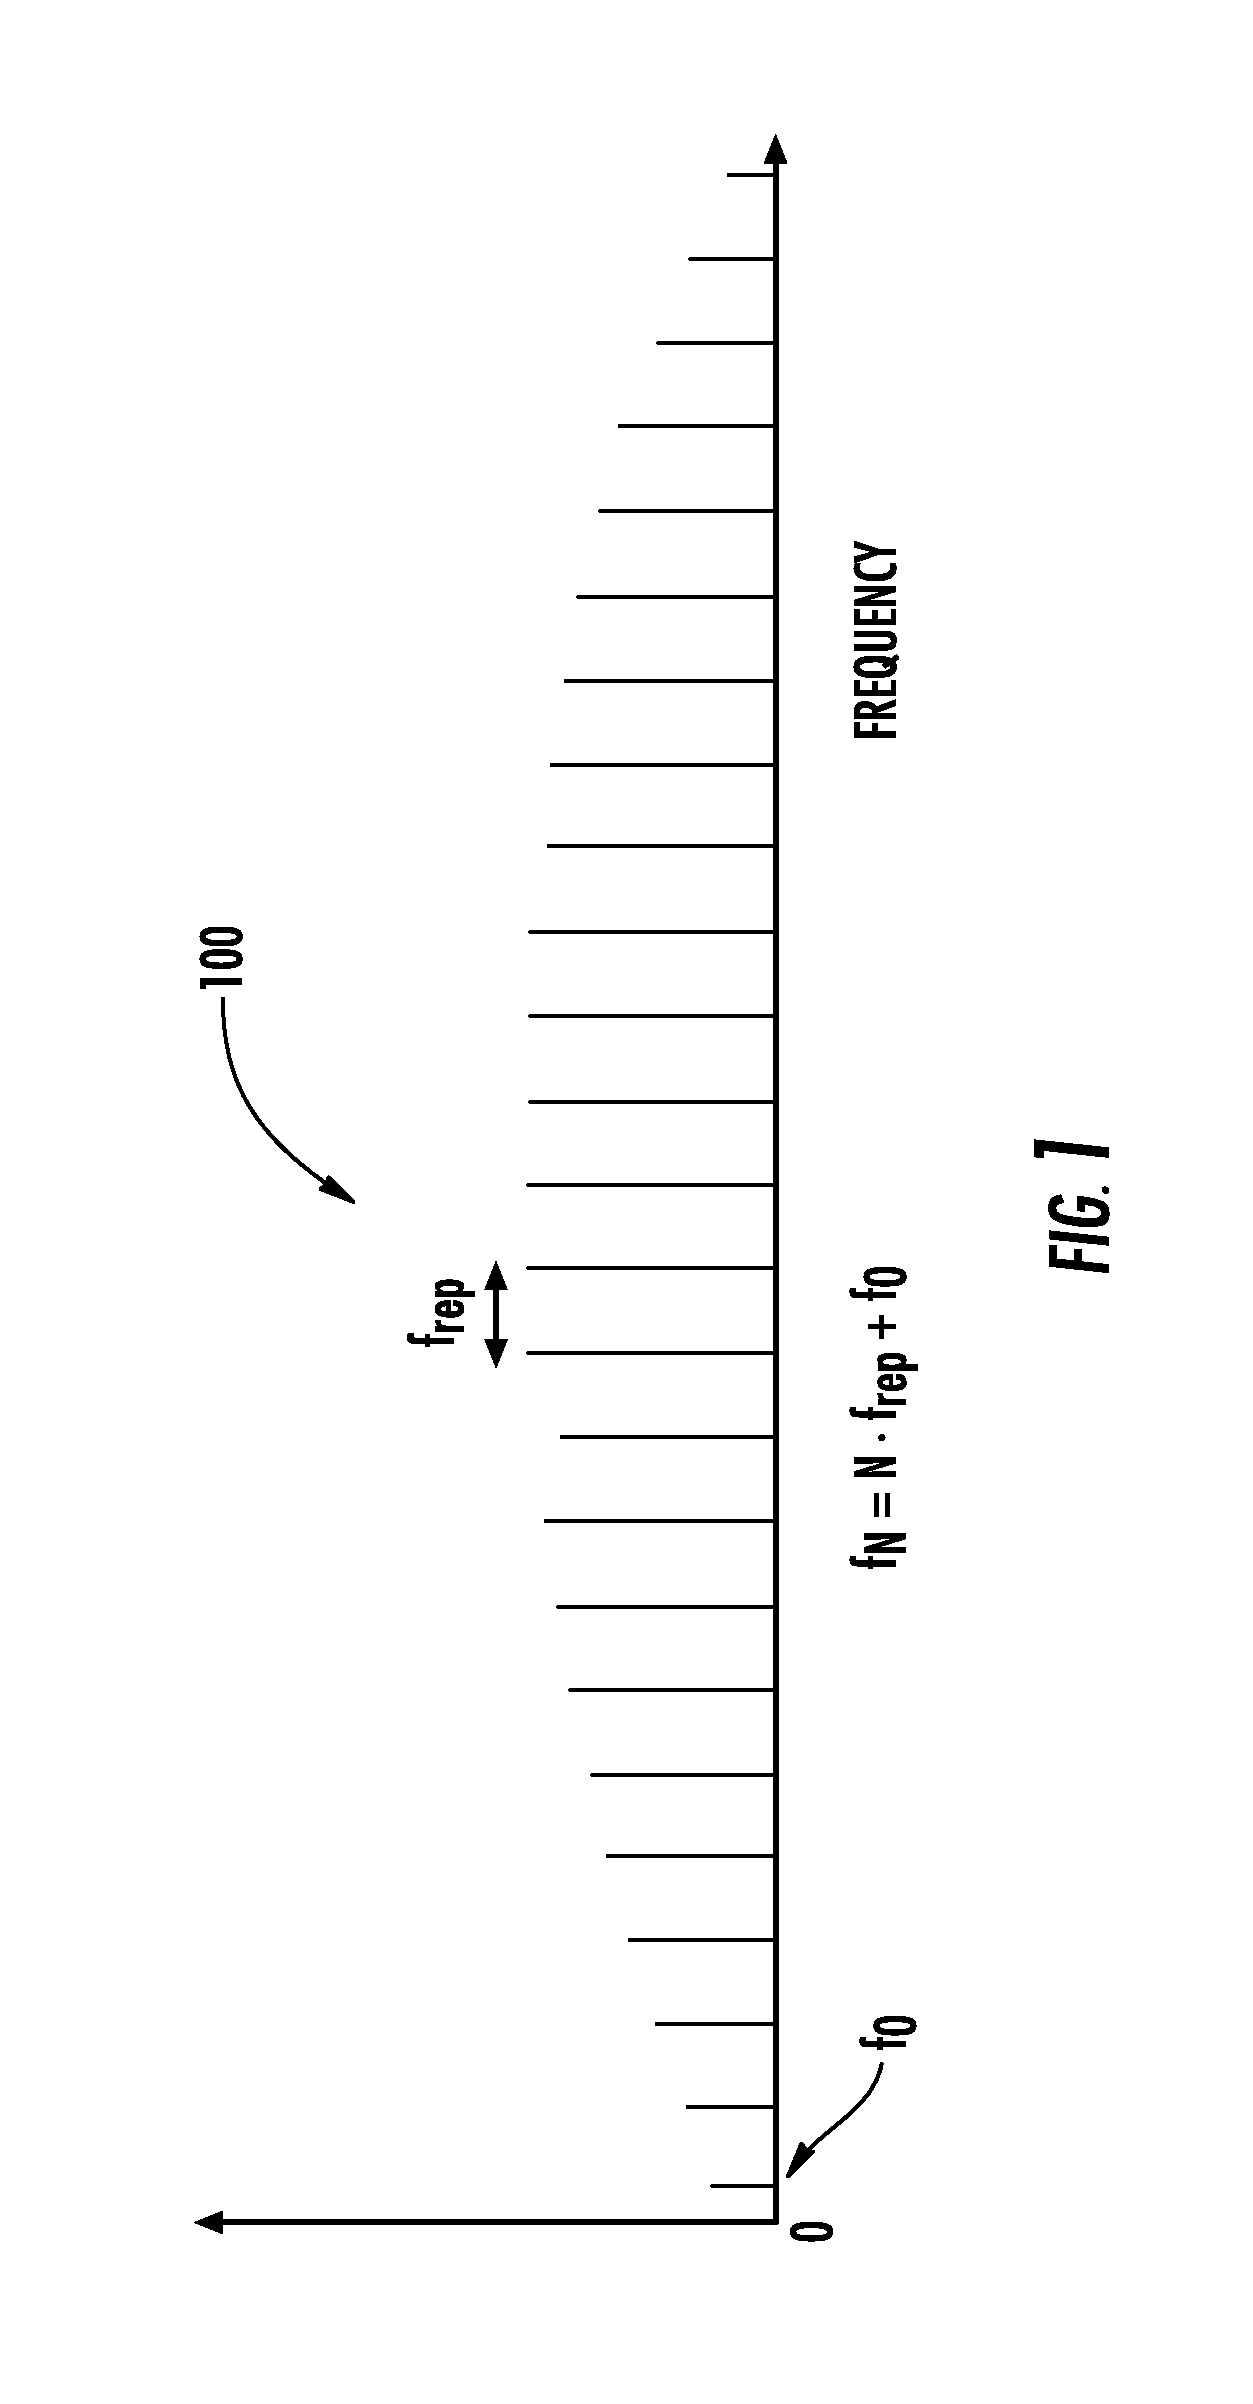 Optical frequency ruler